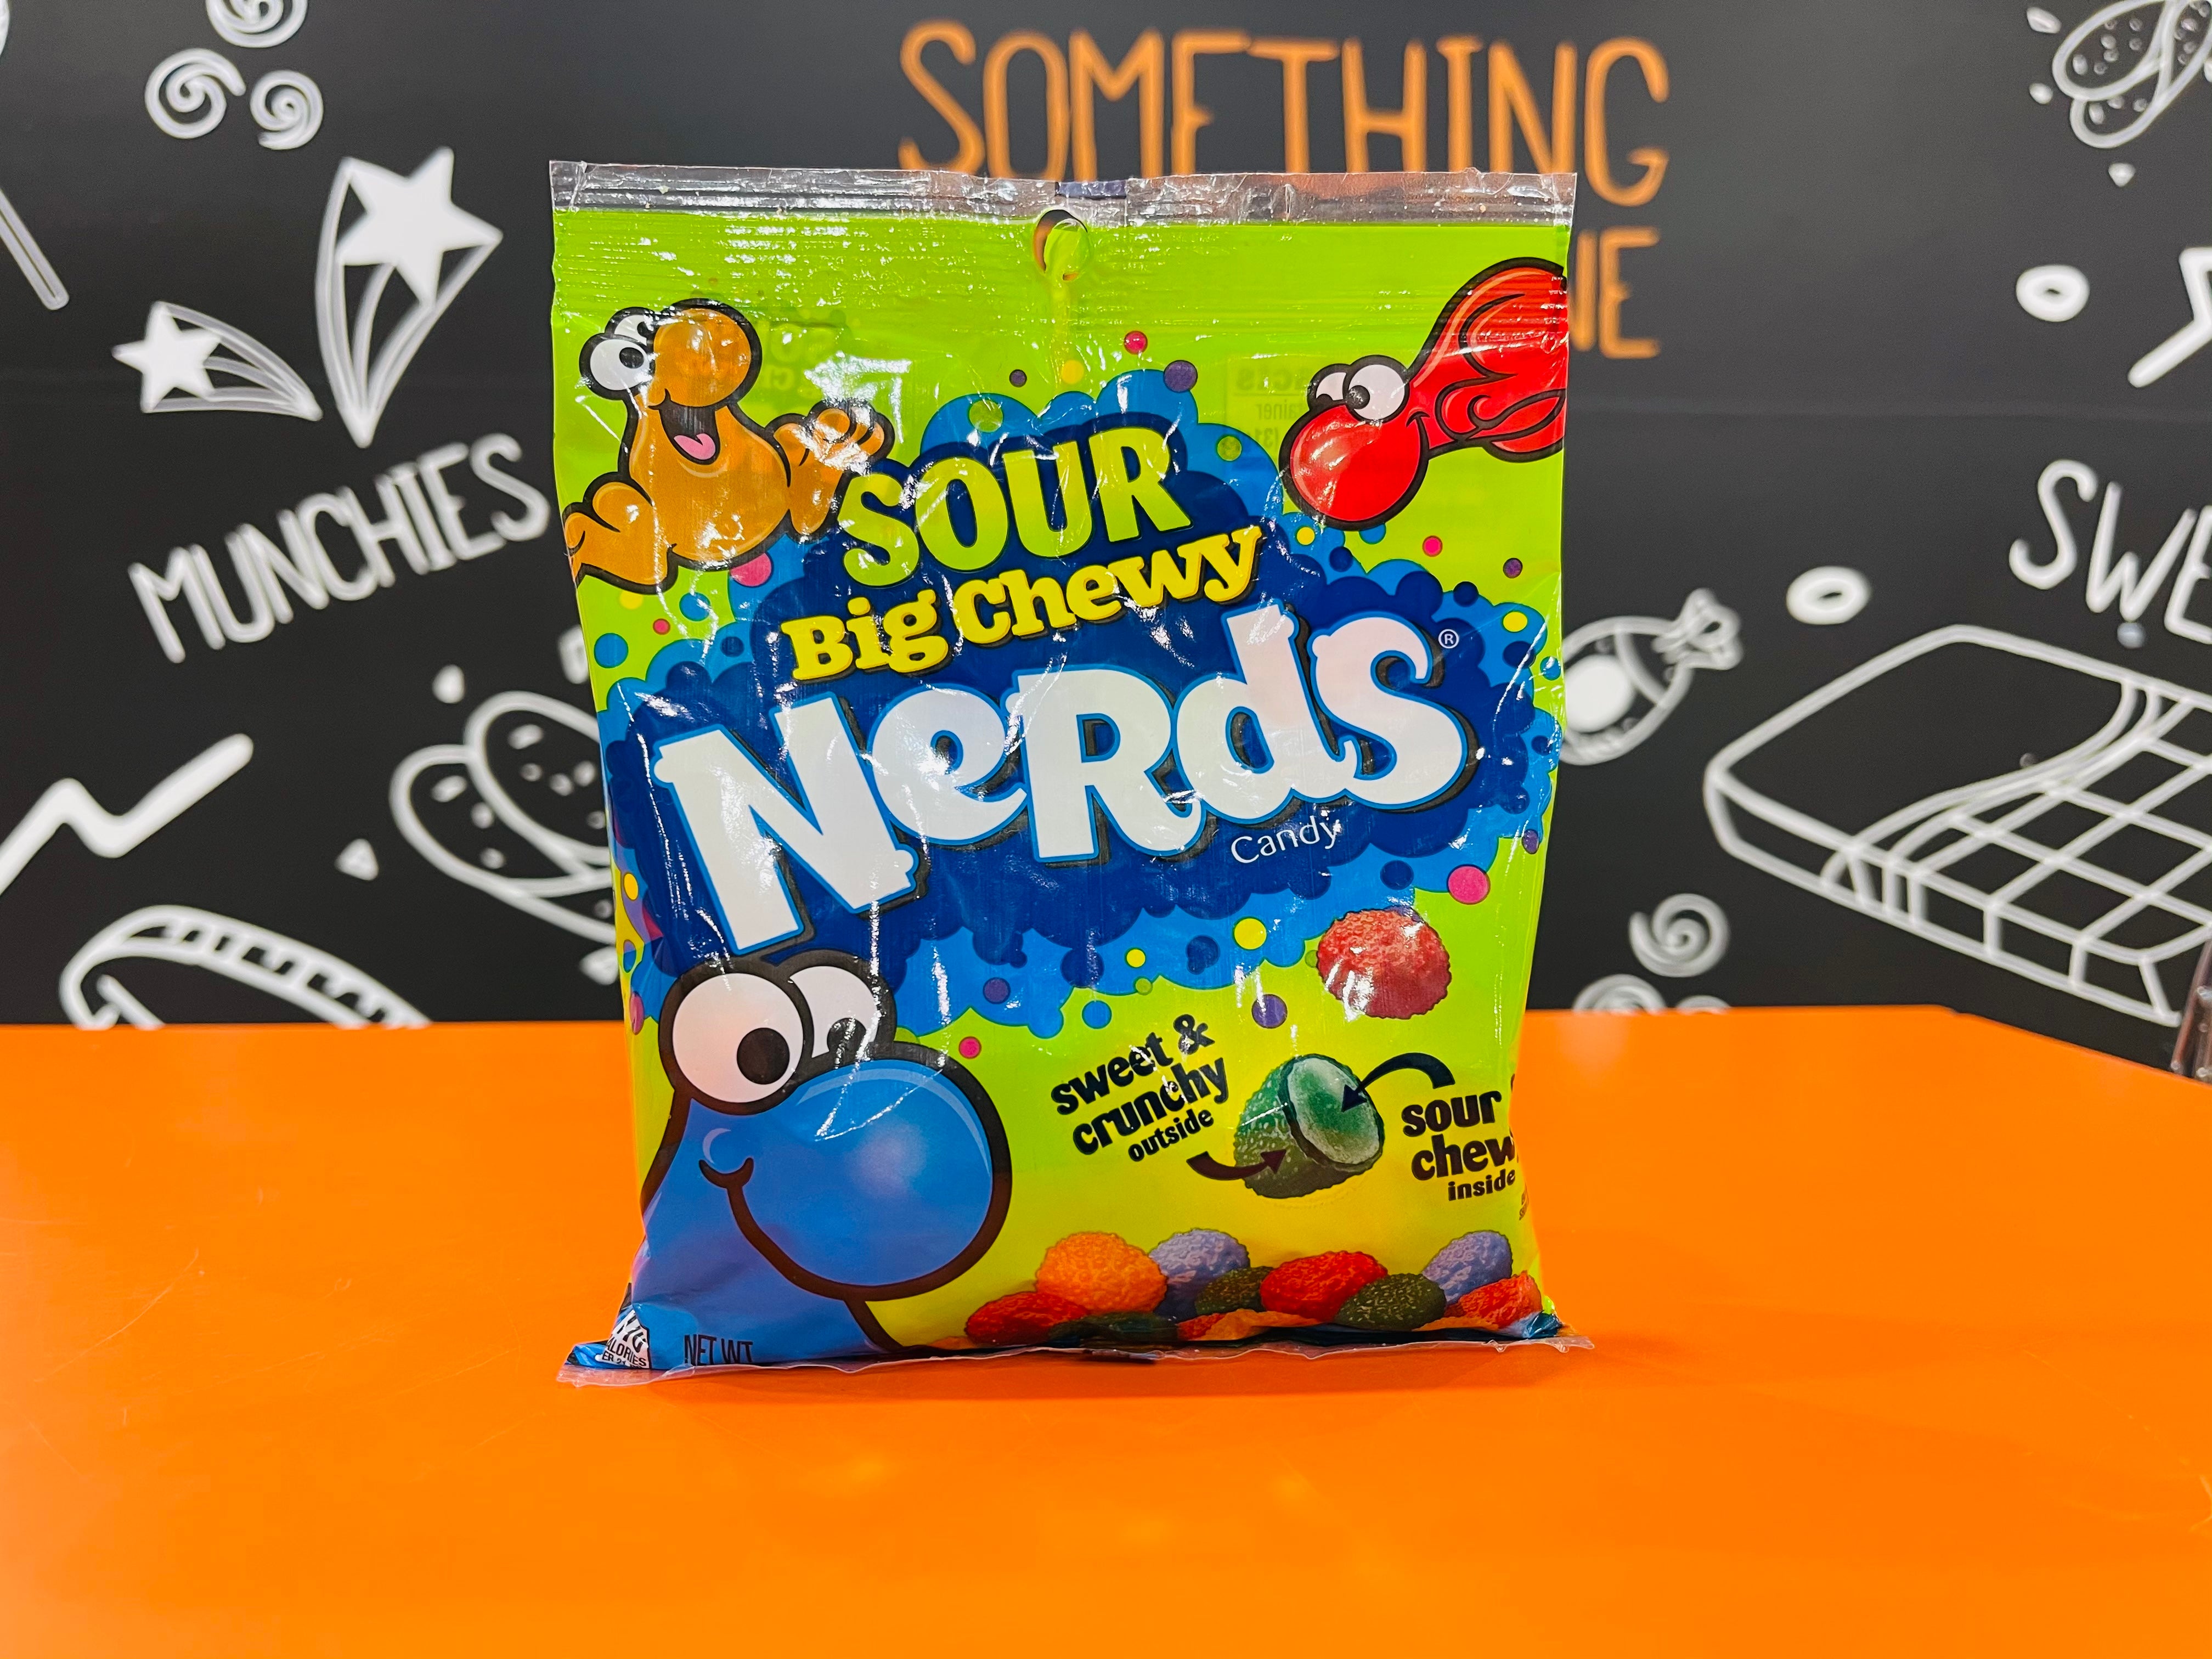 Nerds Sour Big Chewy Candy